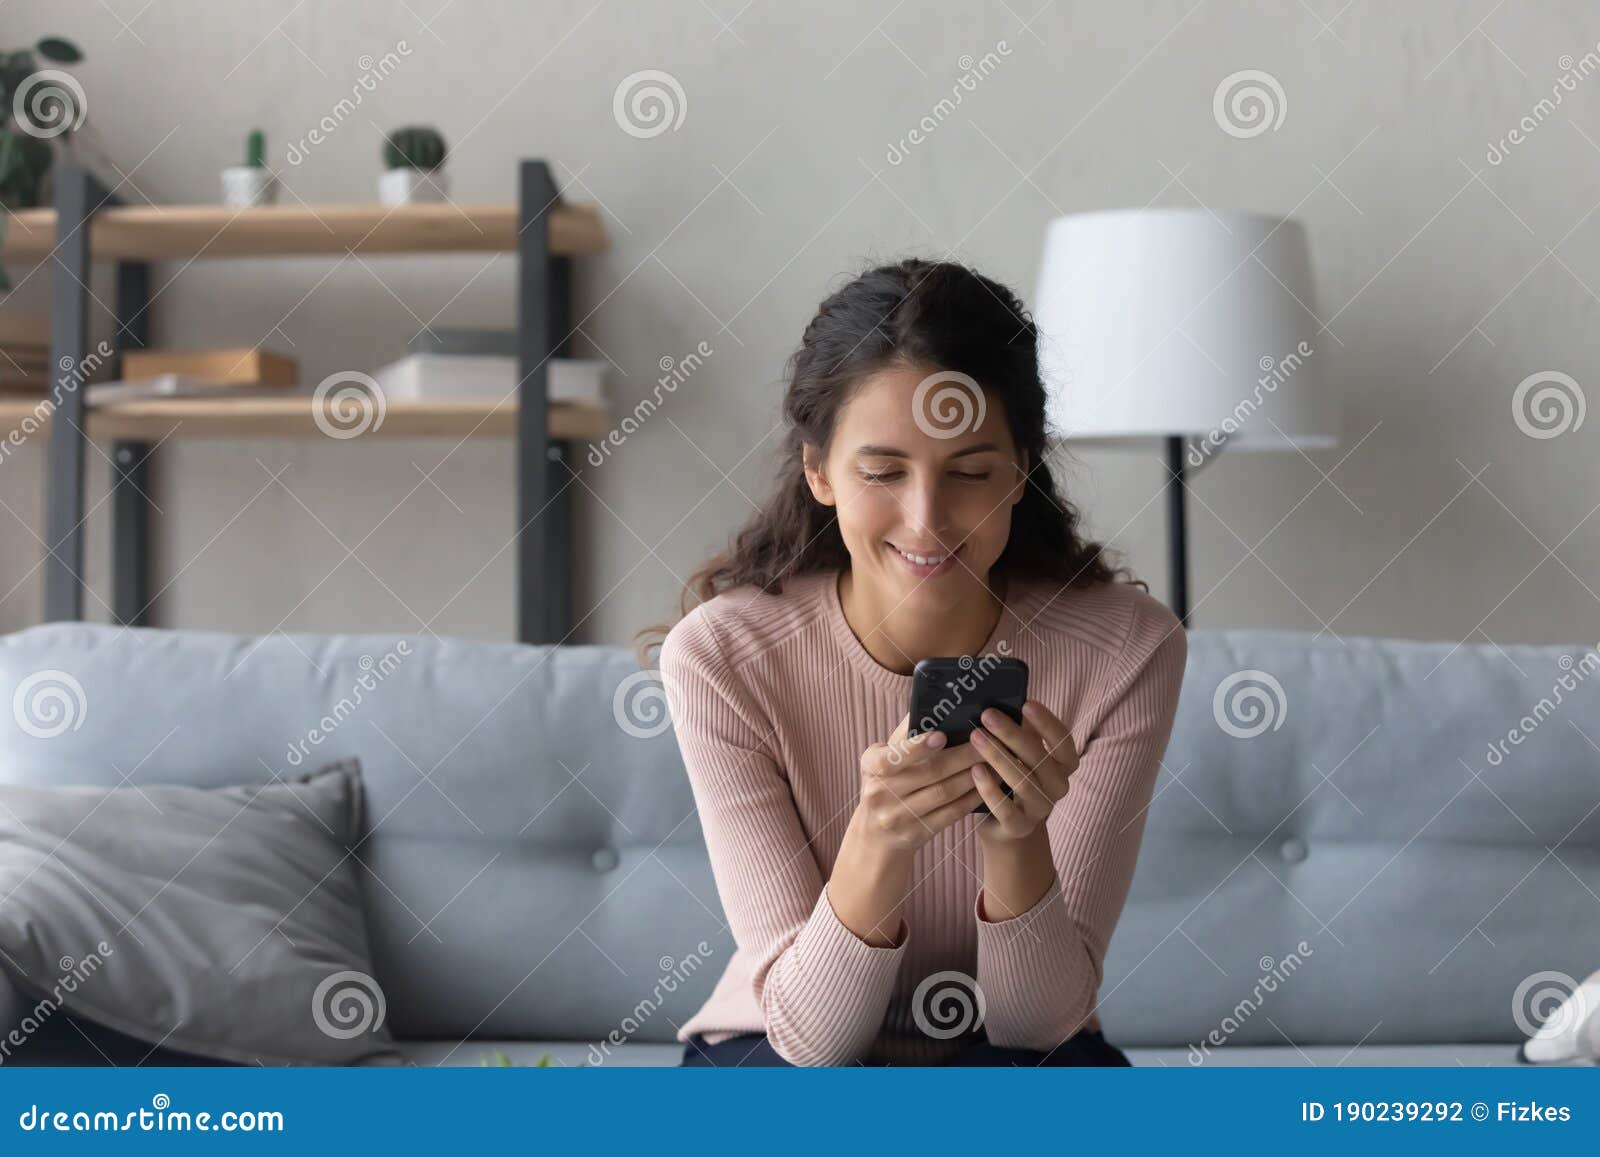 happy millennial woman browsing internet on cellphone at home